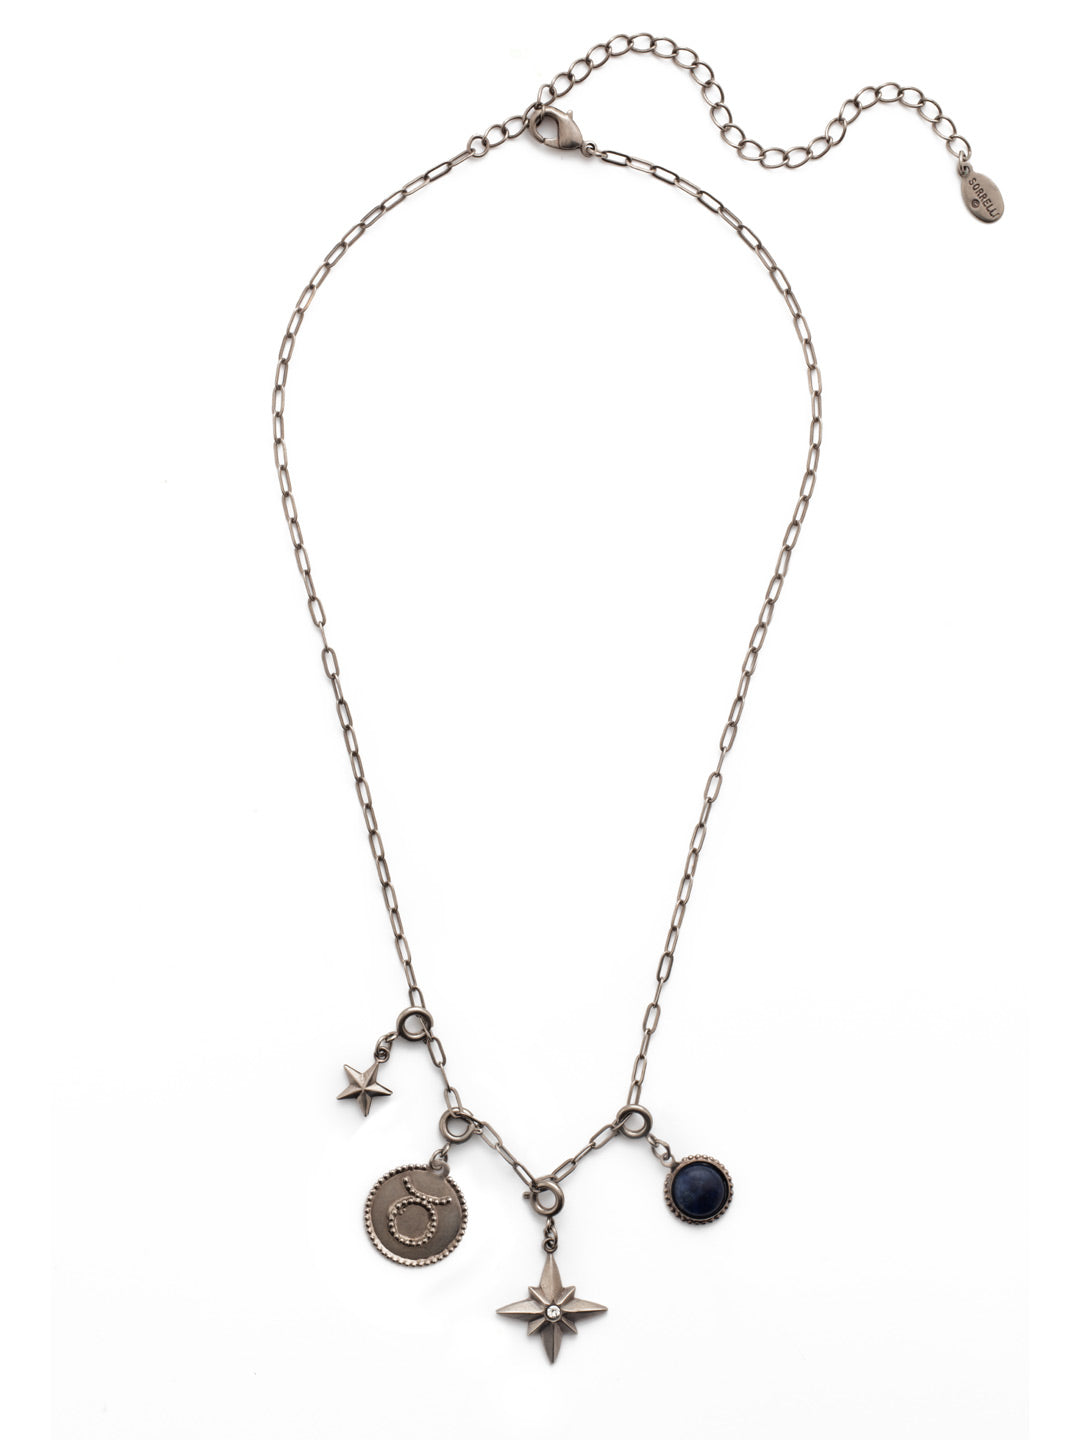 Taurus Pendant Necklace - 4NEU85ASIND - <p>Let everyone know your sign! The Taurus Pendant necklace has a beautiful medallion charm with your astological symbol on it. The pendant hangs from a simple yet modern link chain. From Sorrelli's Industrial collection in our Antique Silver-tone finish.</p>